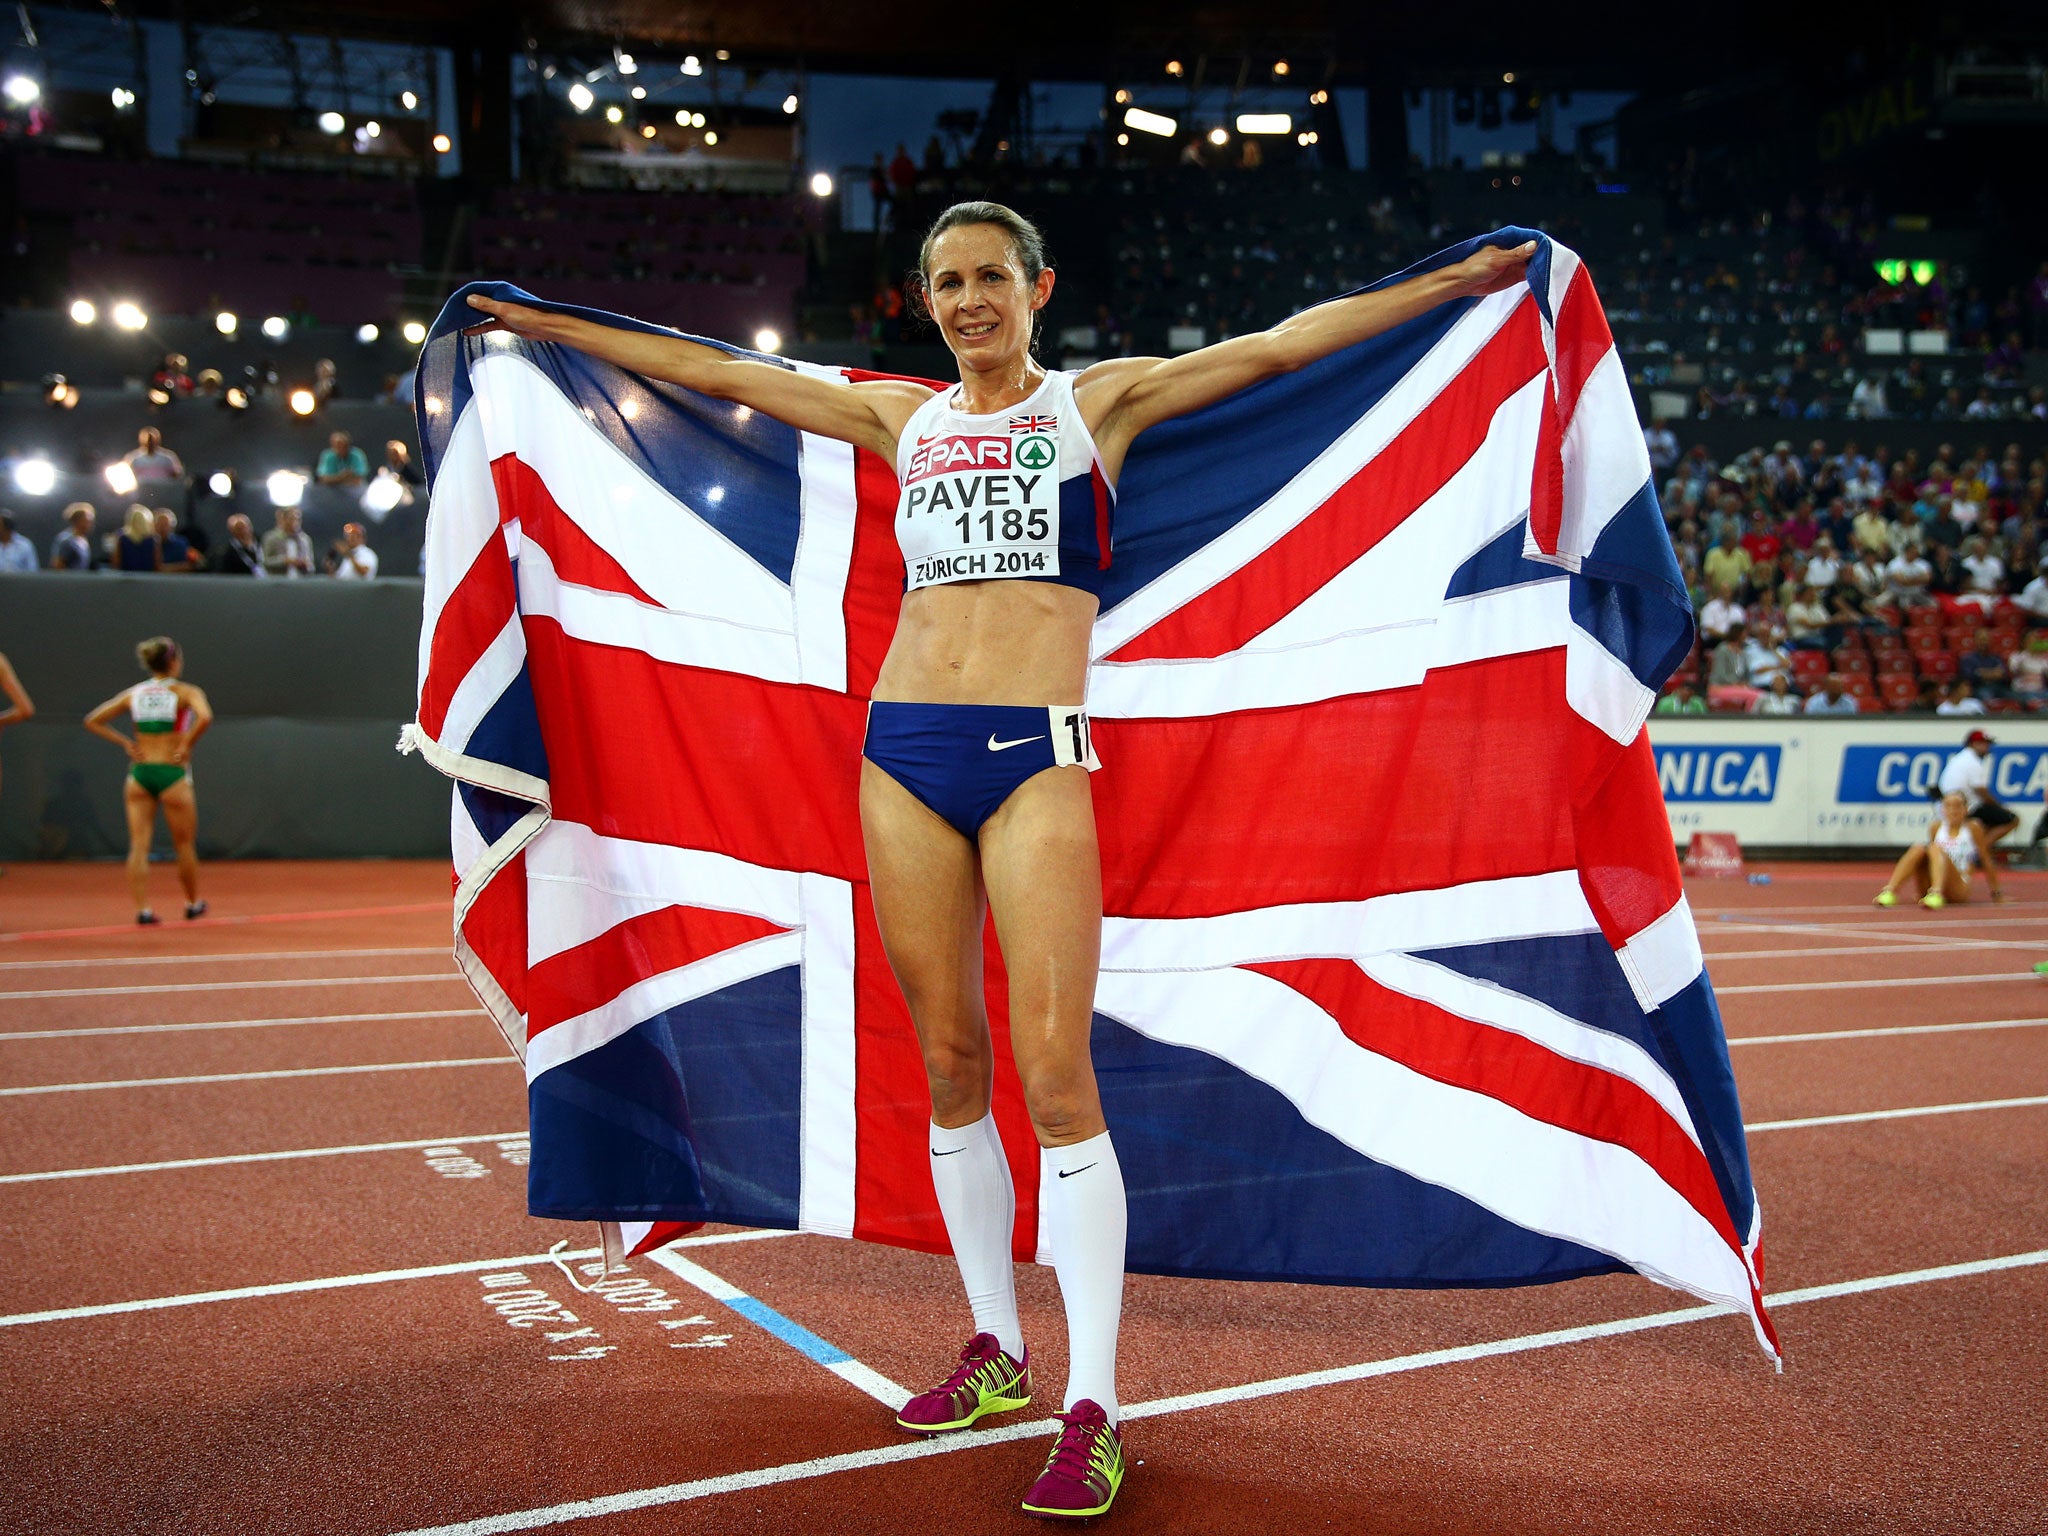 Pavey after winning gold in the Women's 10,000 metres at the European Athletics Championships in Zurich last year